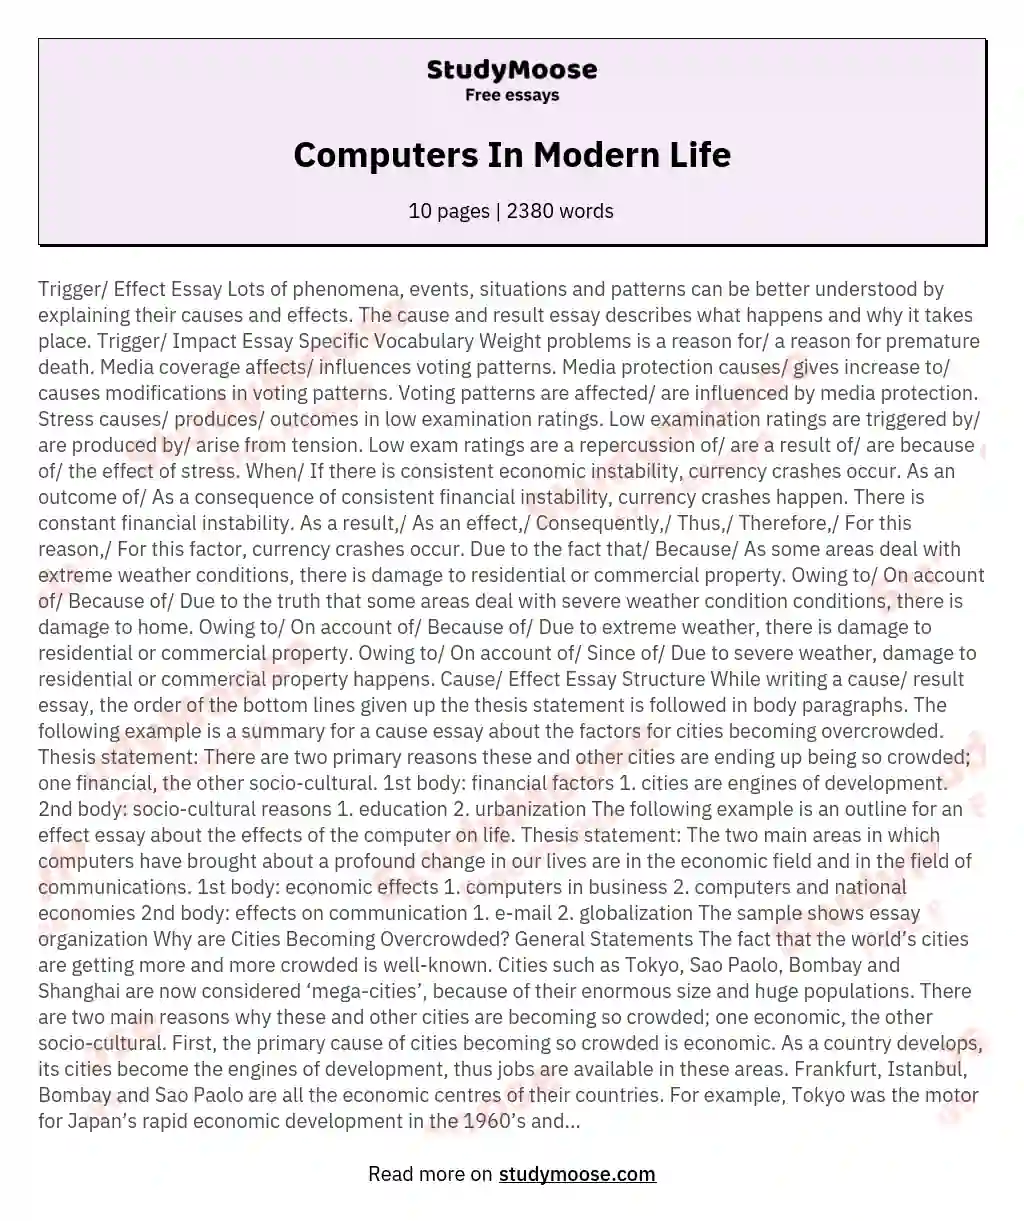 essay about the computer in modern life